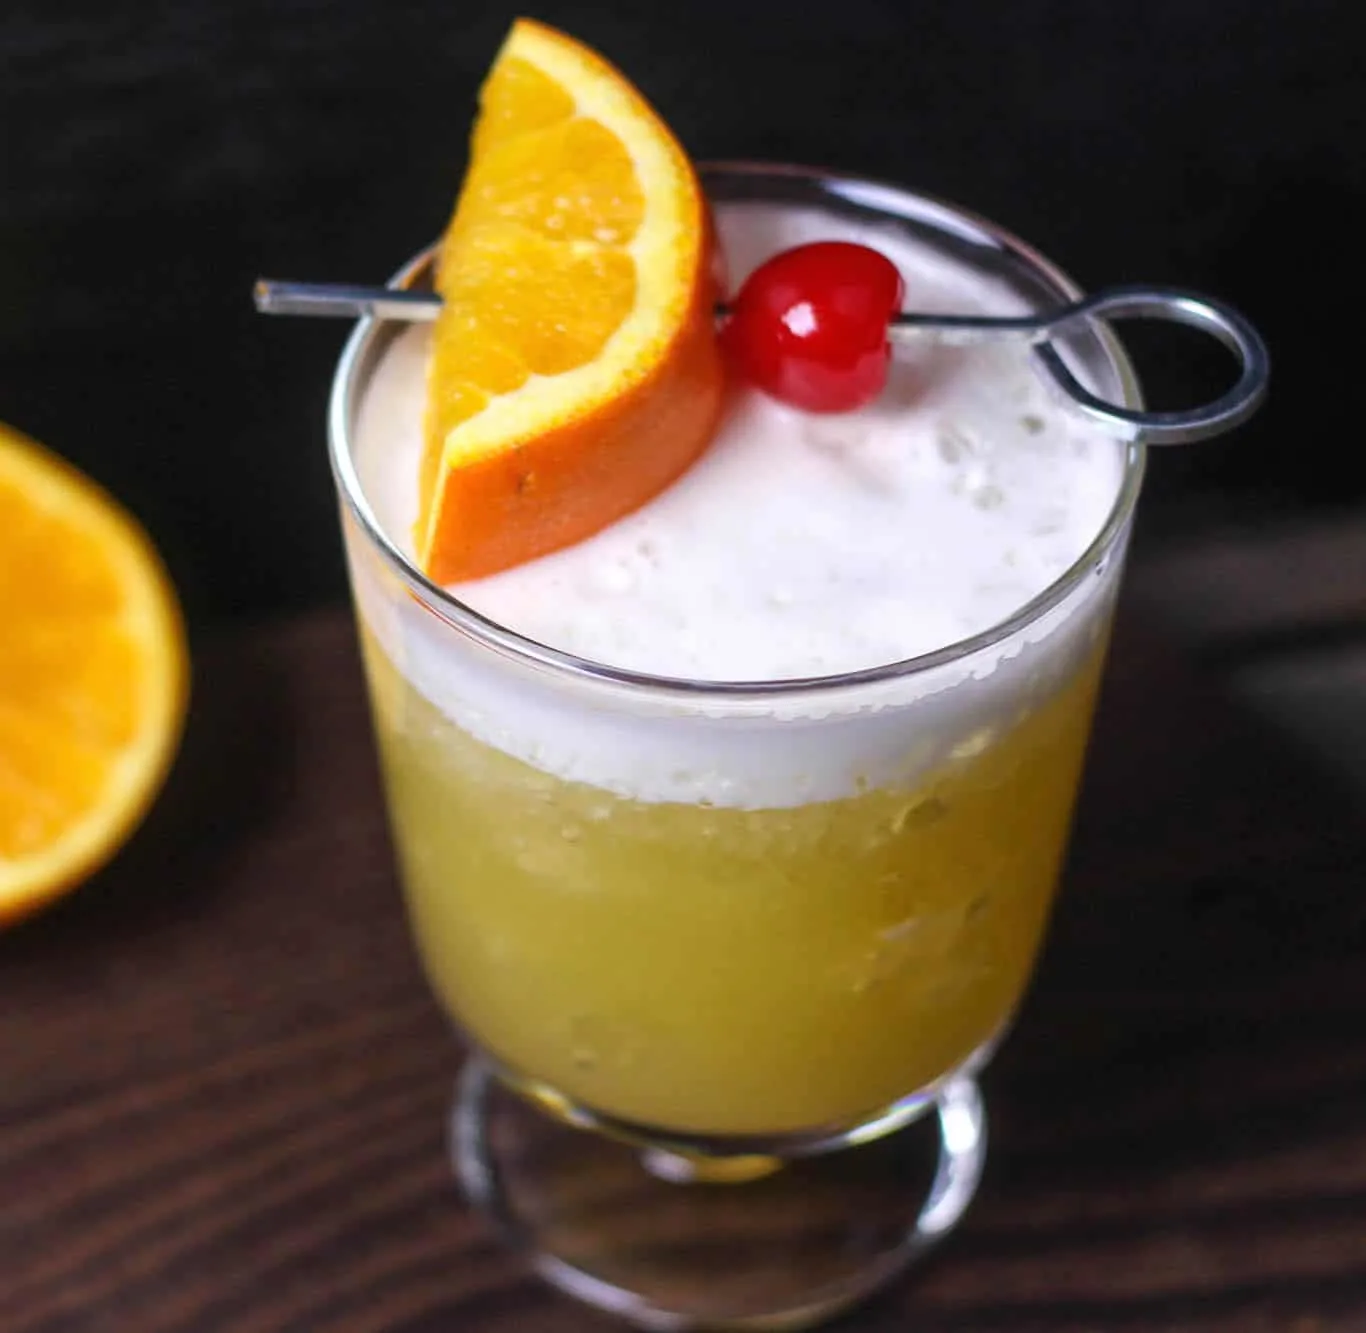 This Orange Whiskey Sour Recipe Goes Down Easy Diy Candy,How To Grill Pork Chops On Gas Grill